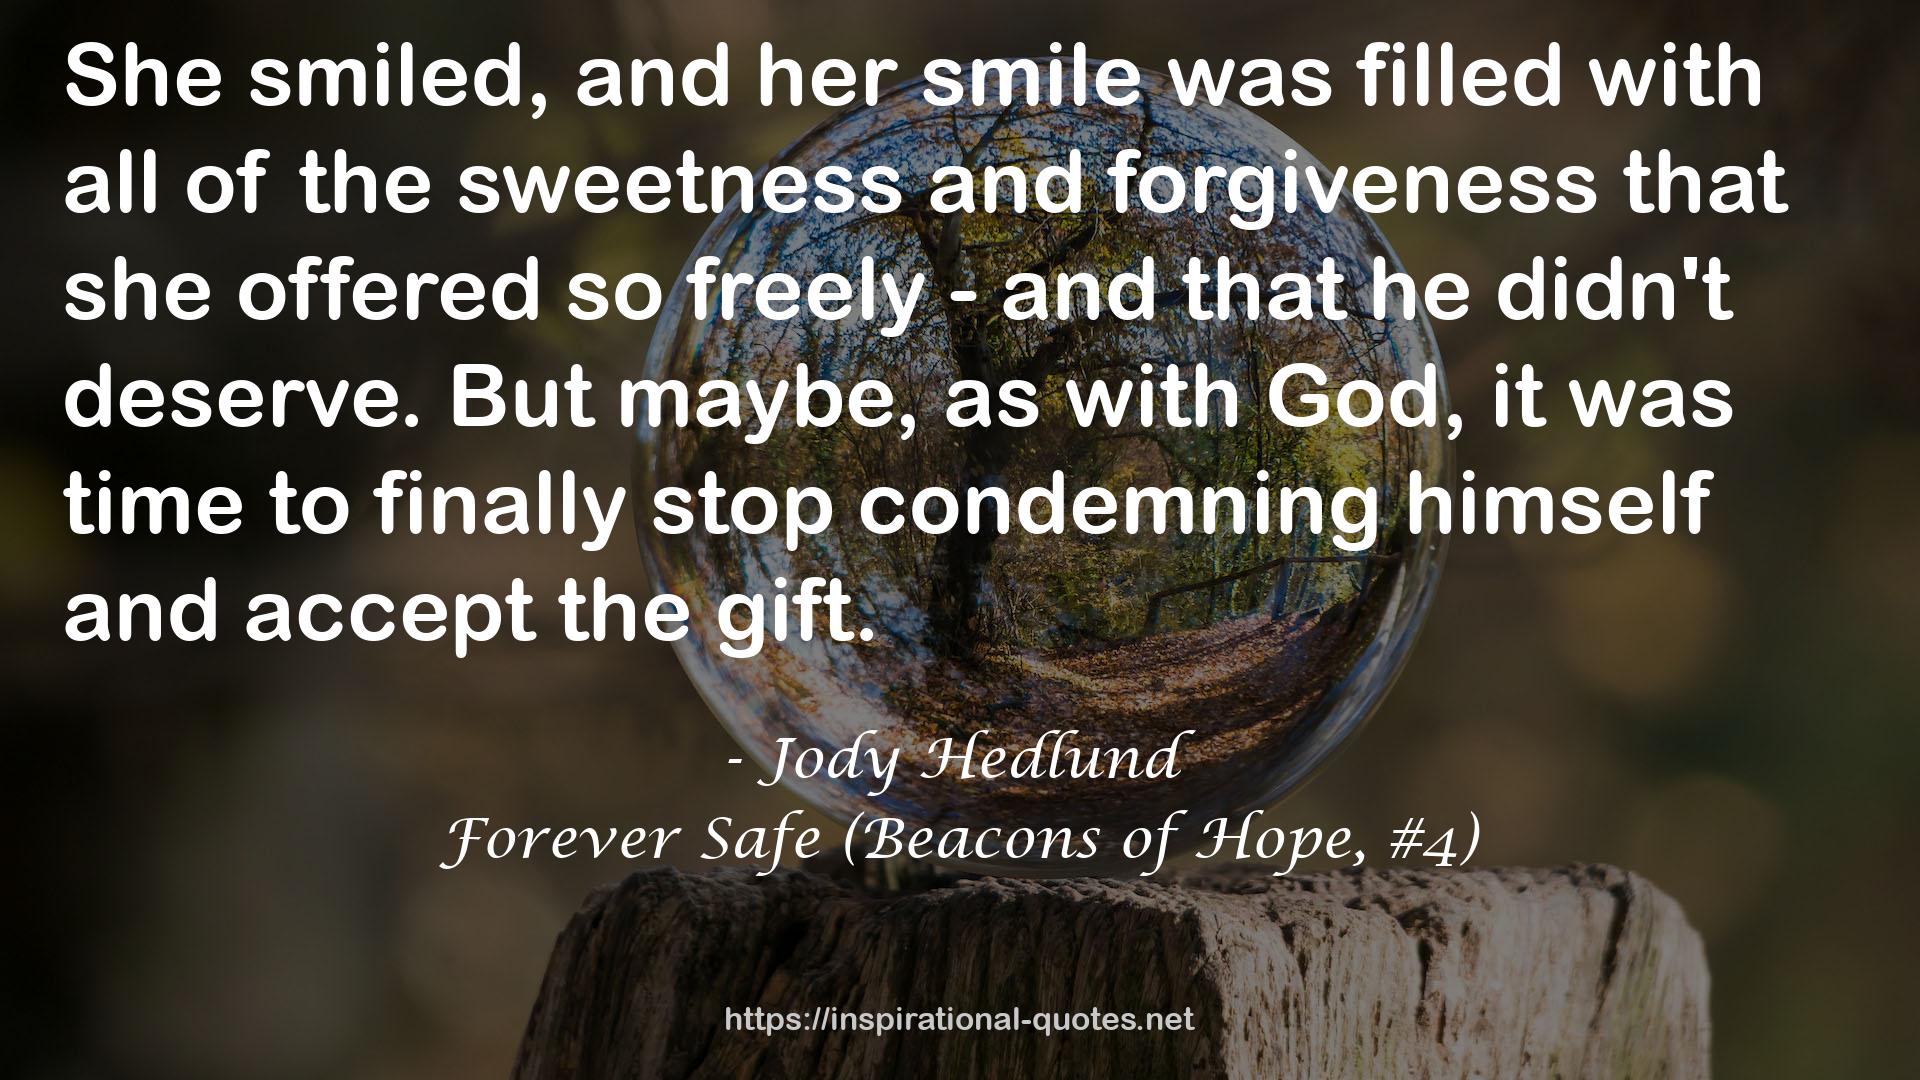 Forever Safe (Beacons of Hope, #4) QUOTES